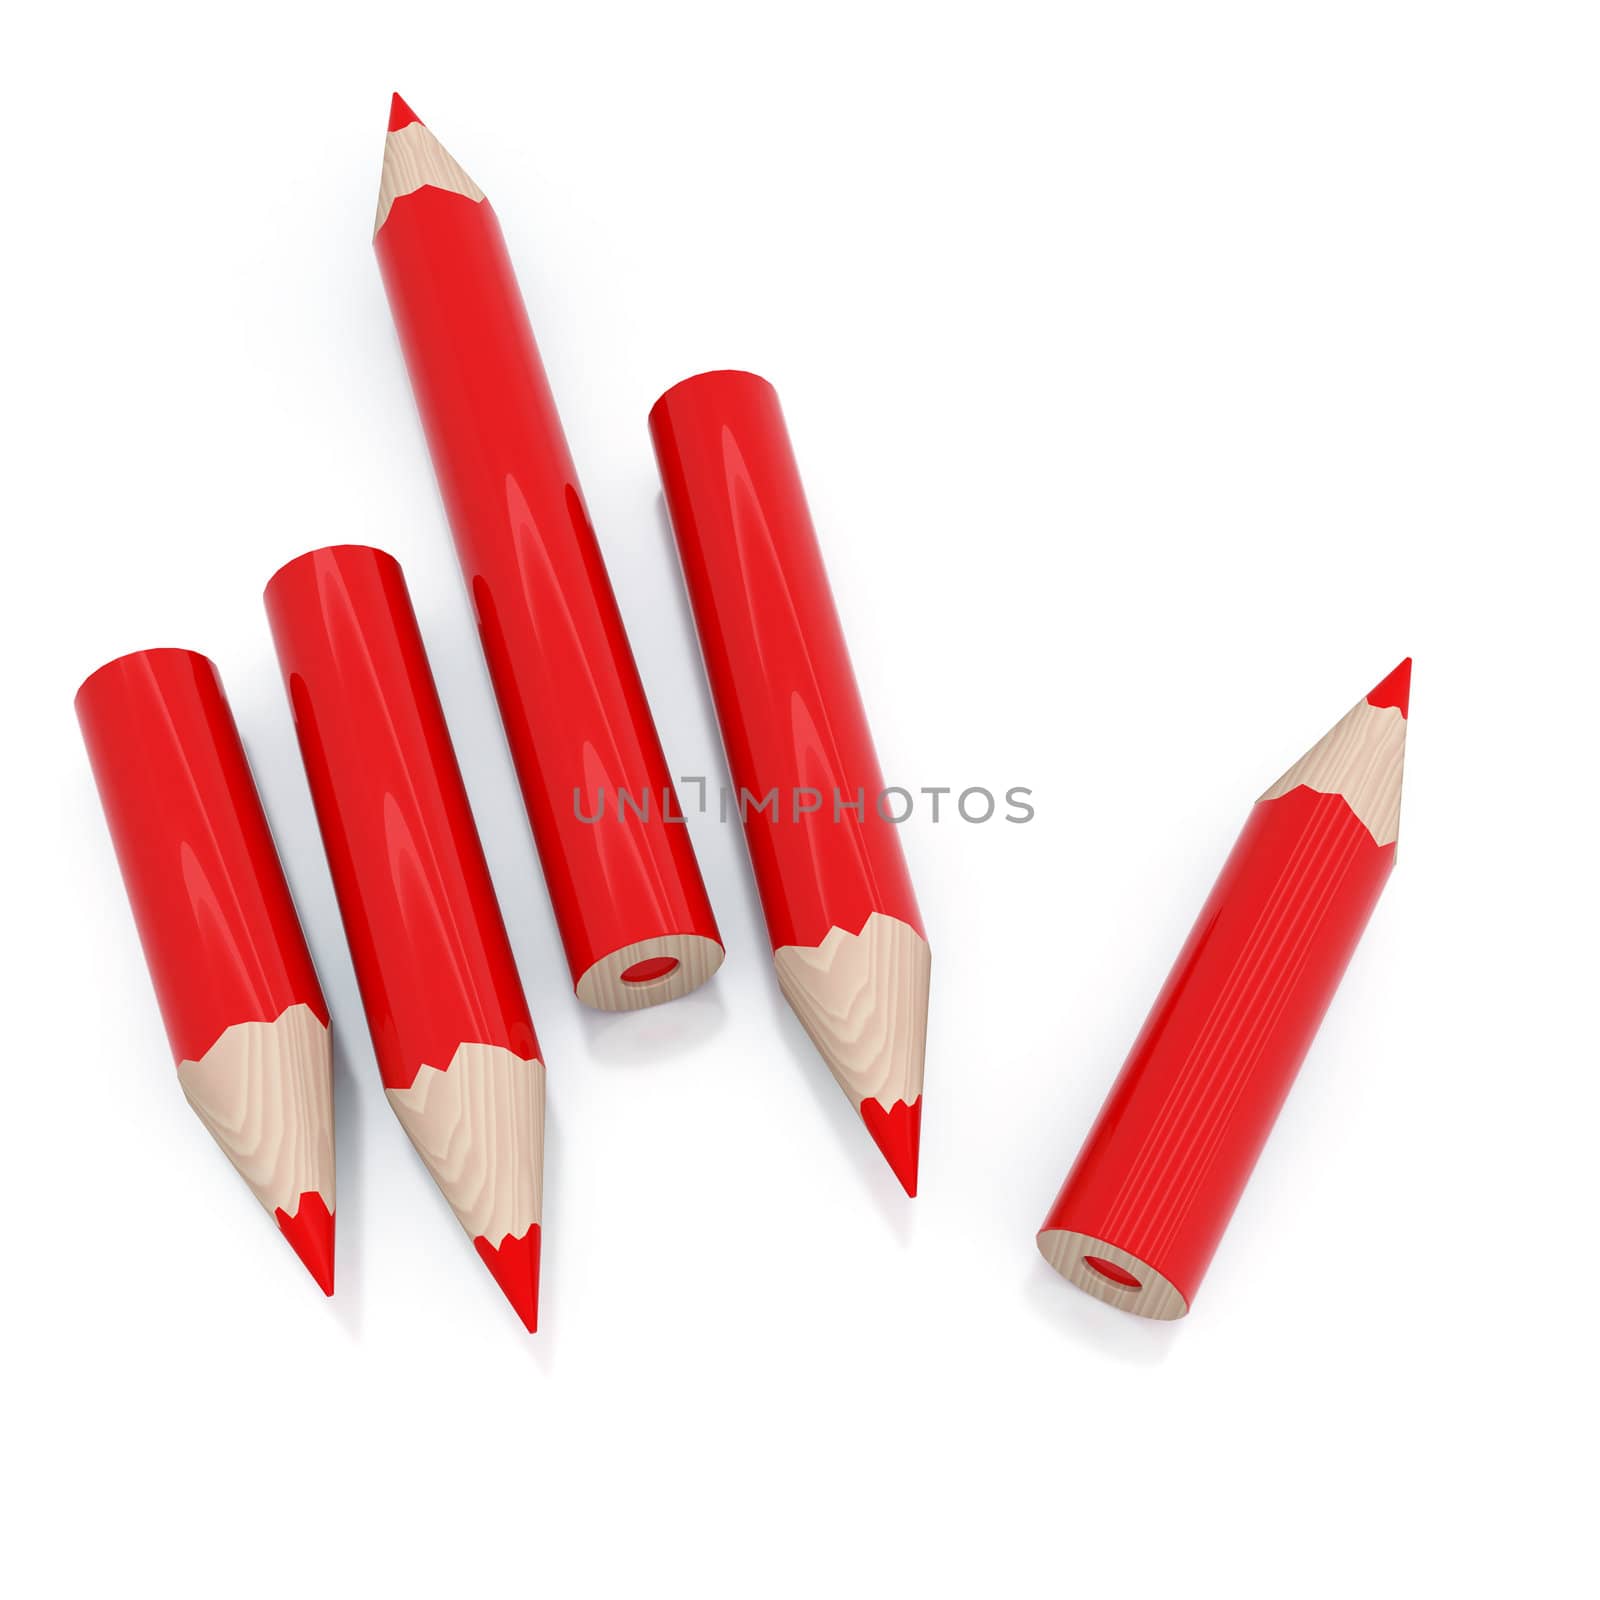 red pencil on white background by Serp